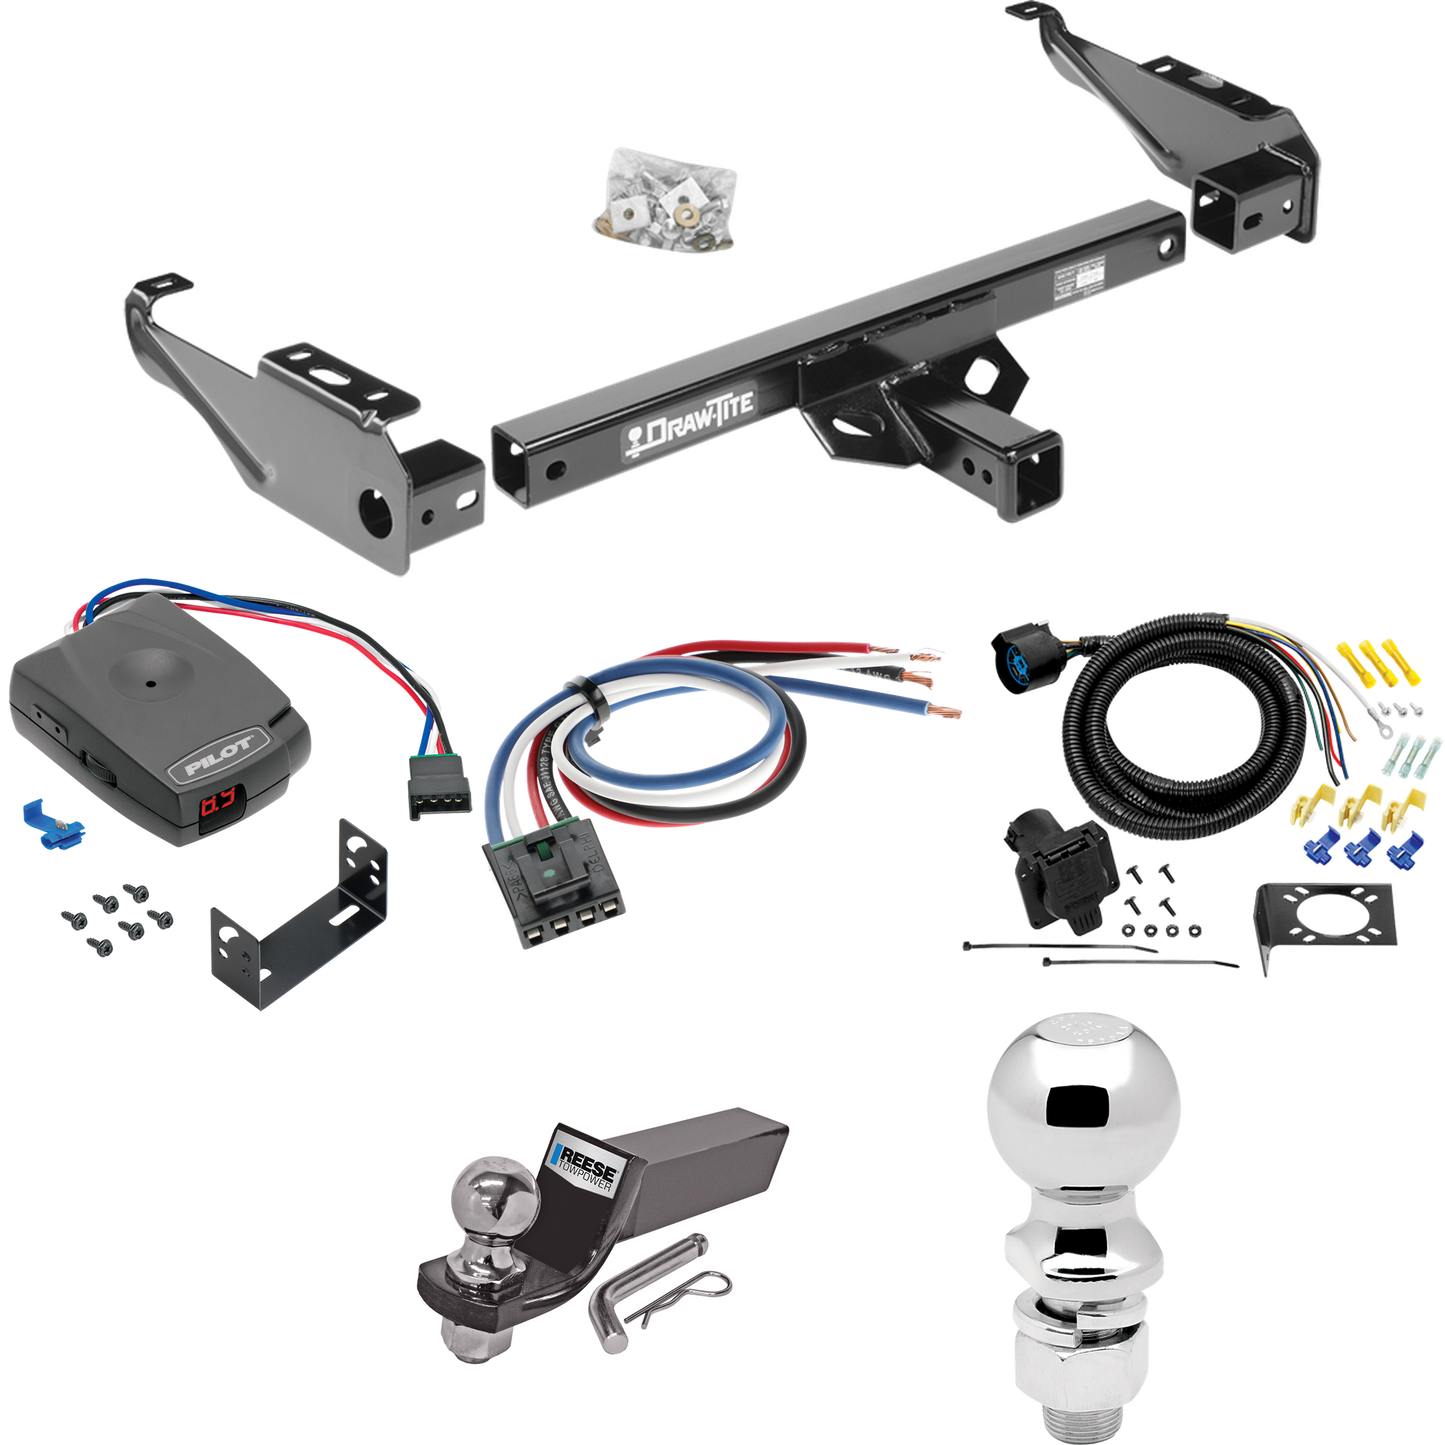 Fits 1979-2000 GMC C2500 Trailer Hitch Tow PKG w/ Pro Series Pilot Brake Control + Generic BC Wiring Adapter + 7-Way RV Wiring + 2" & 2-5/16" Ball & Drop Mount By Draw-Tite